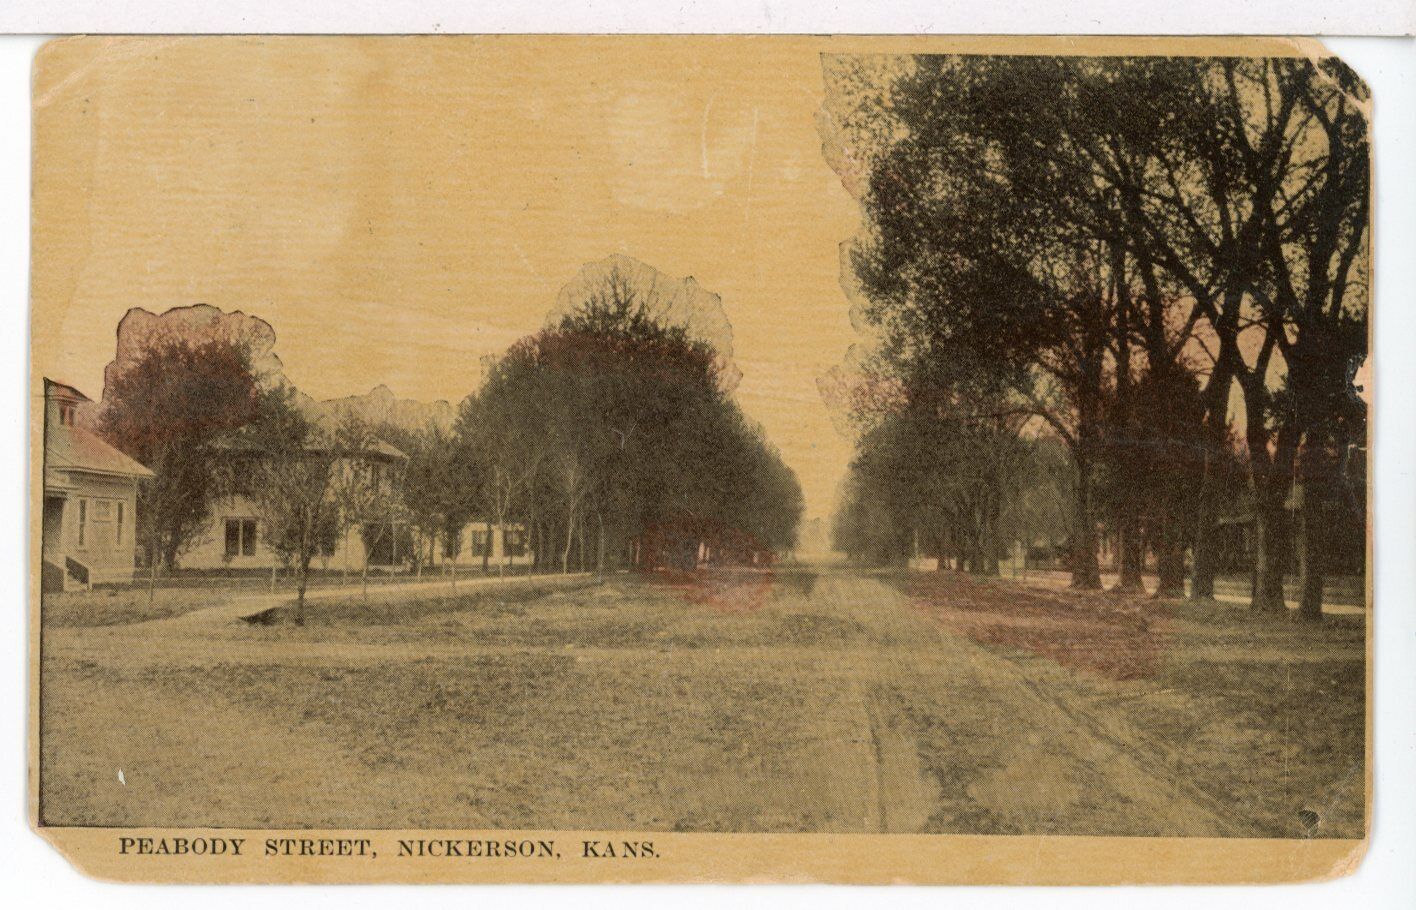 1921 - Looking Down Peabody Street in Nickerson, Kansas Landscapes Postcard